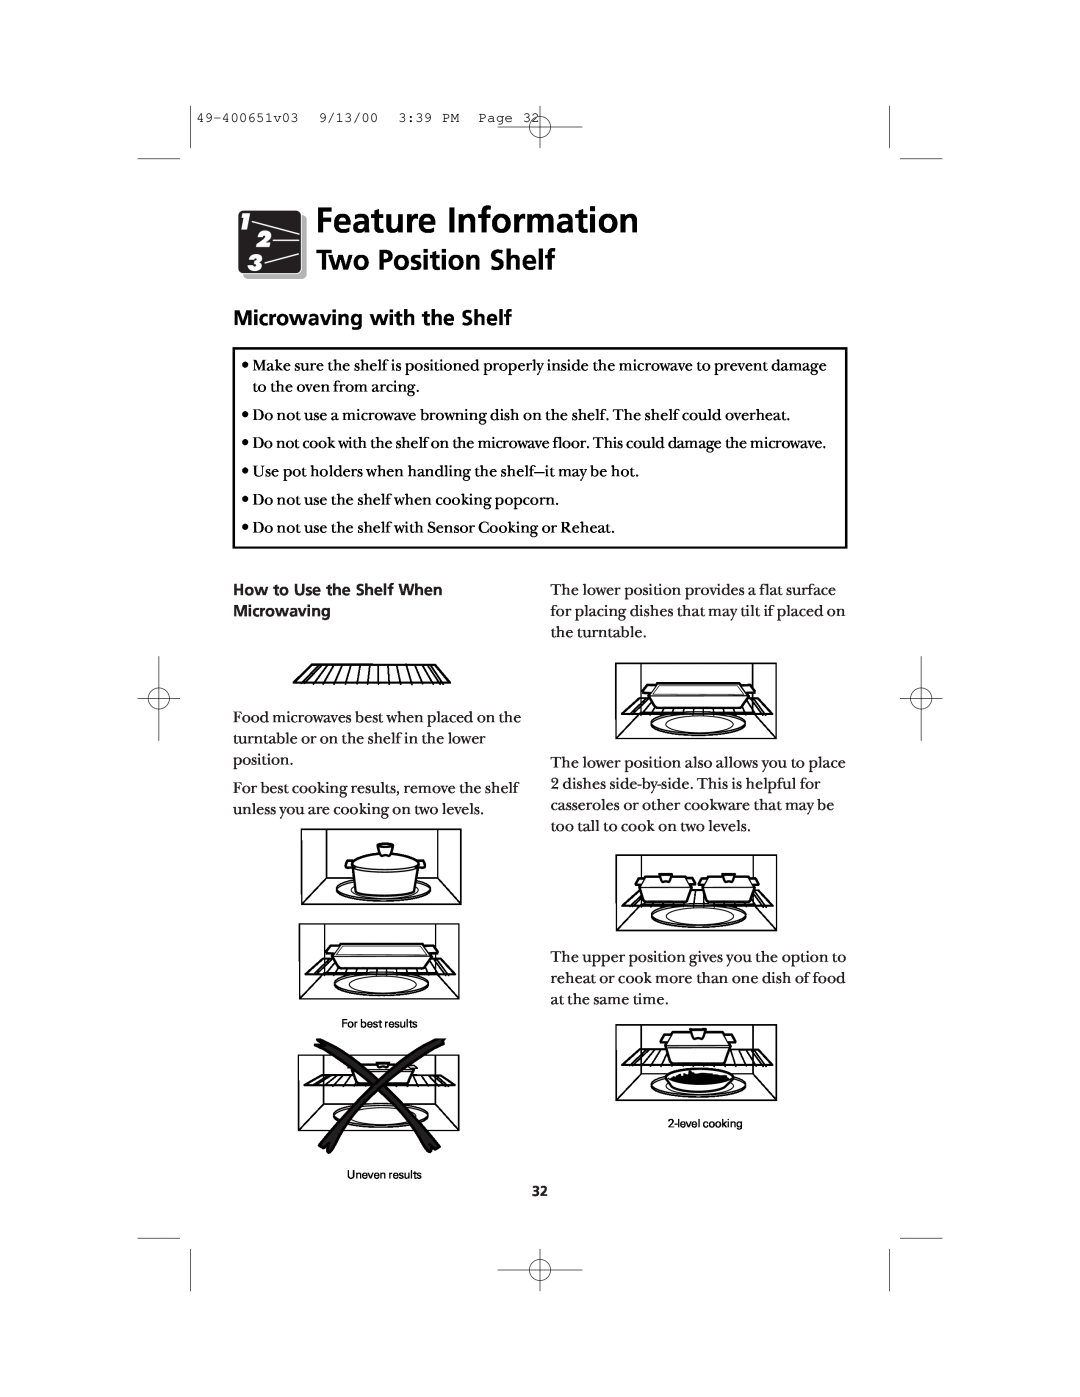 Frigidaire FMT148 warranty Feature Information, Two Position Shelf, Microwaving with the Shelf 